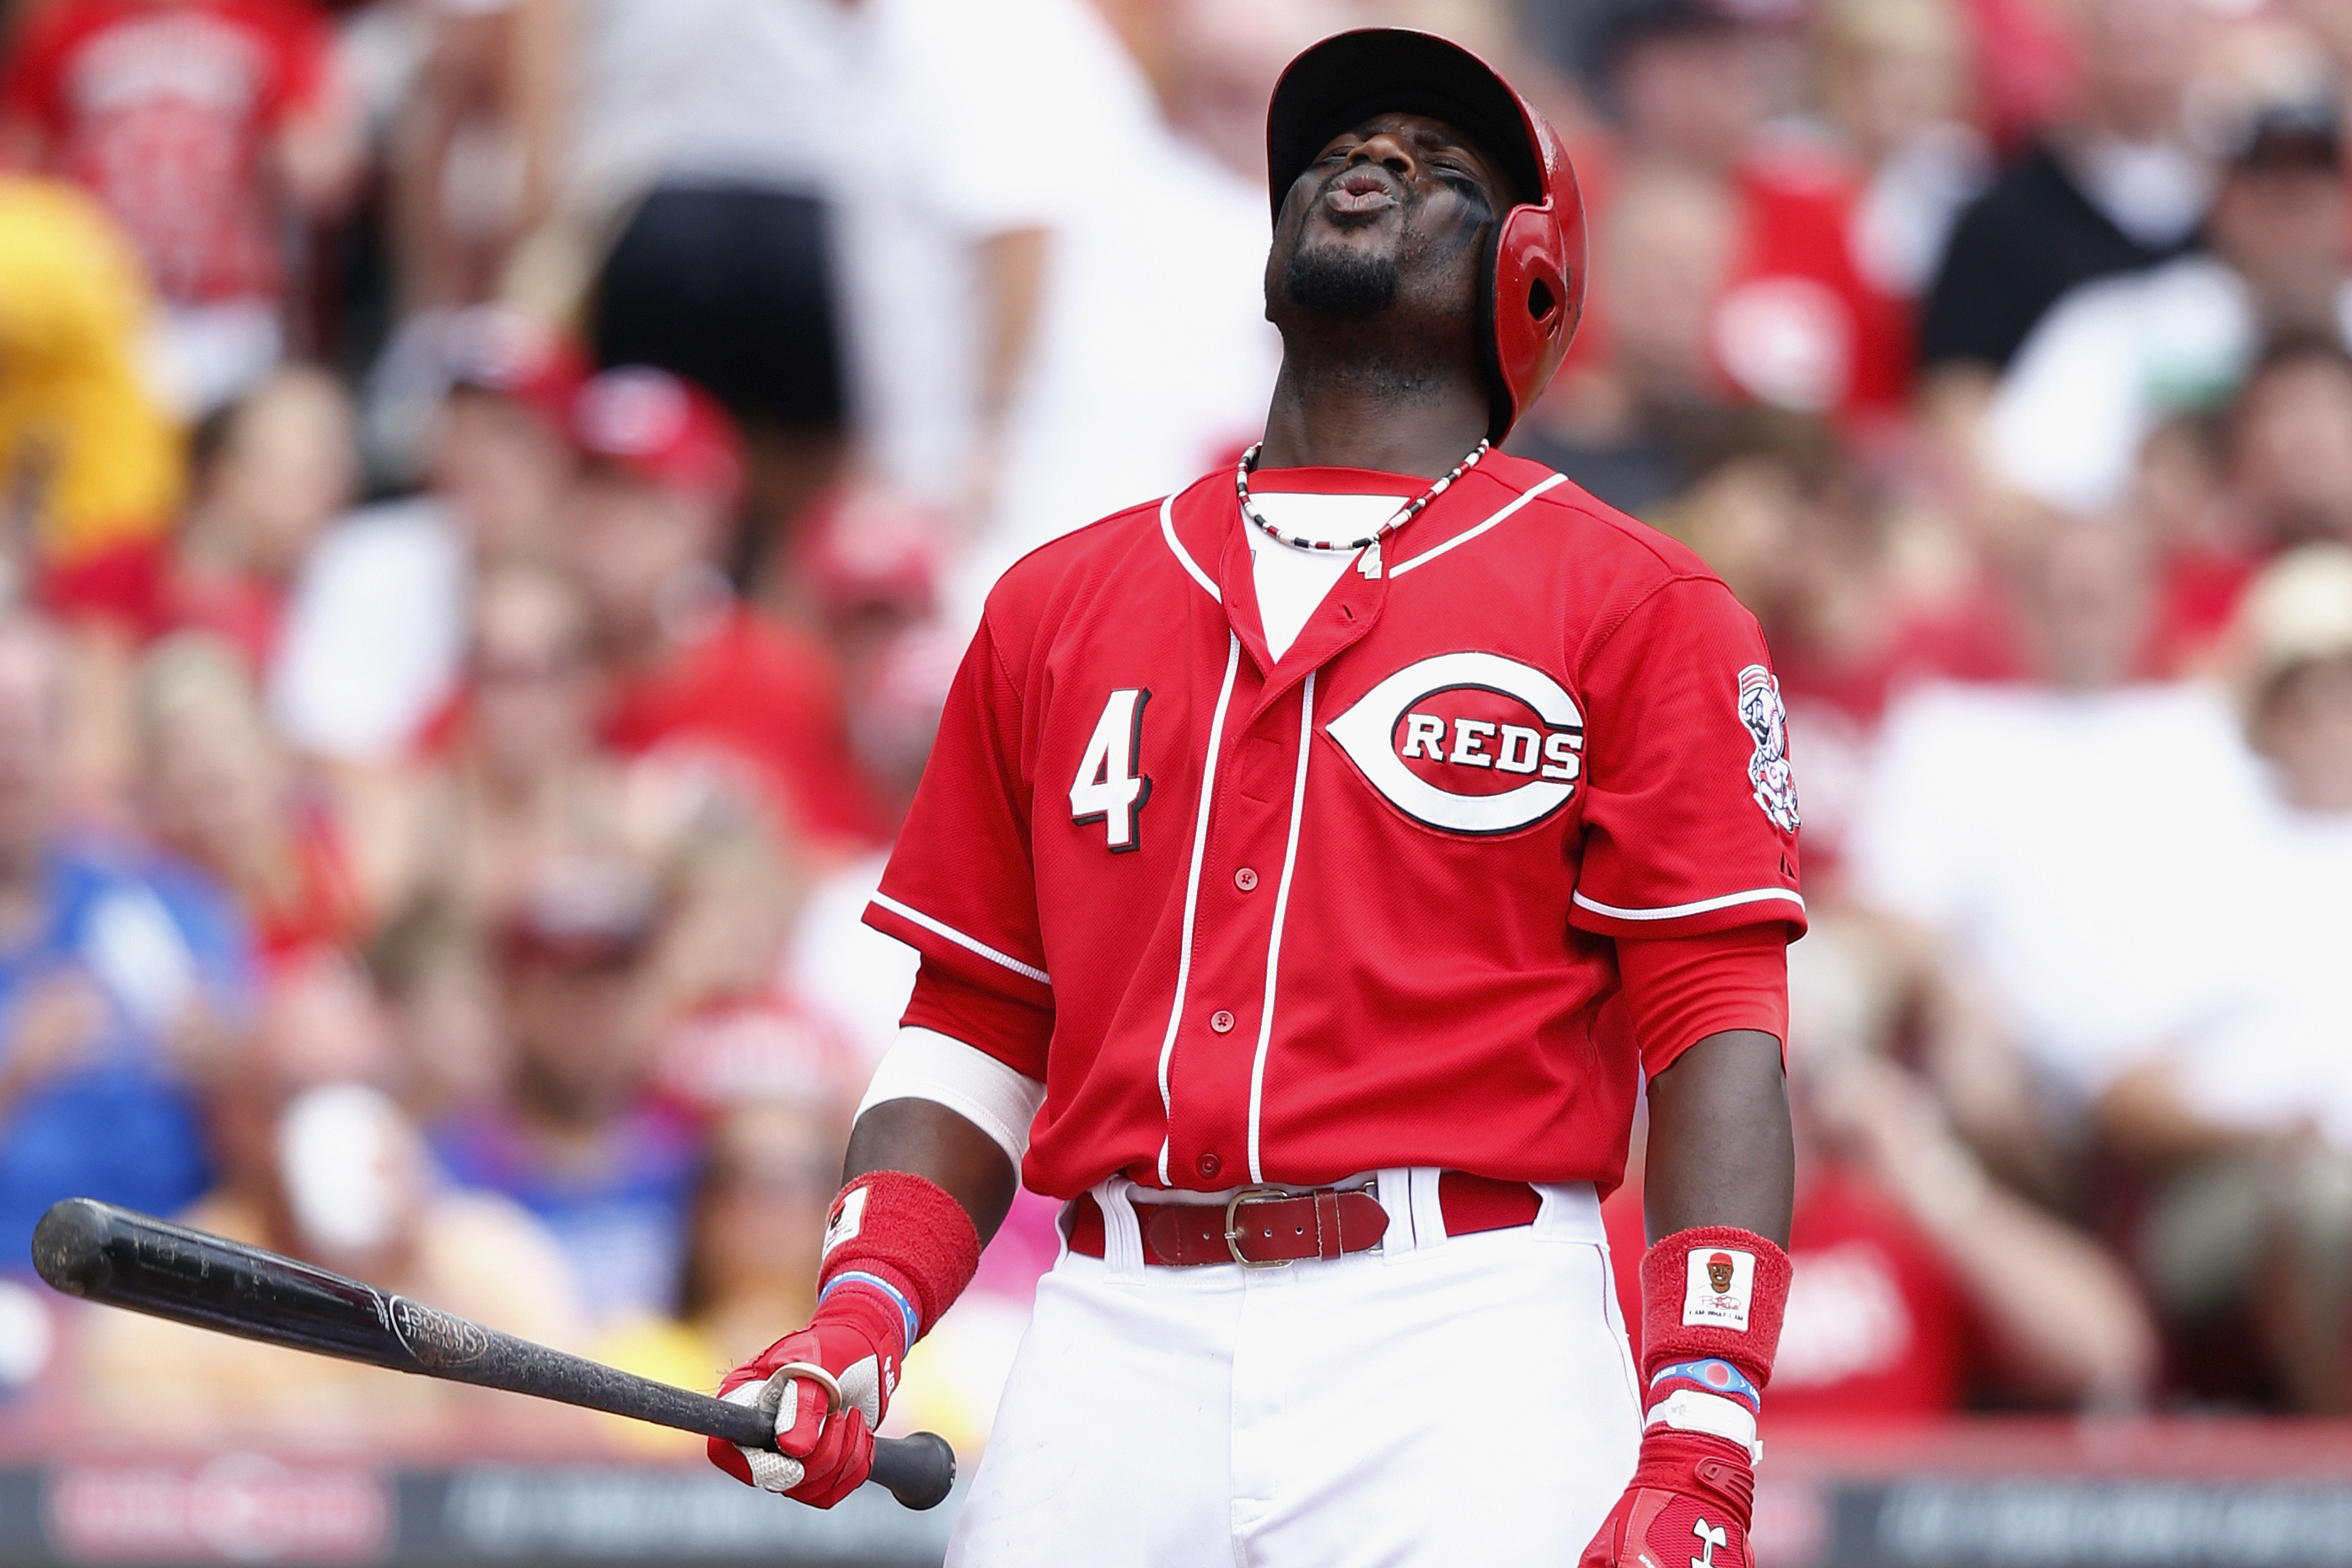 Brandon Phillips's 2-year-old shows off his skills at Reds batting